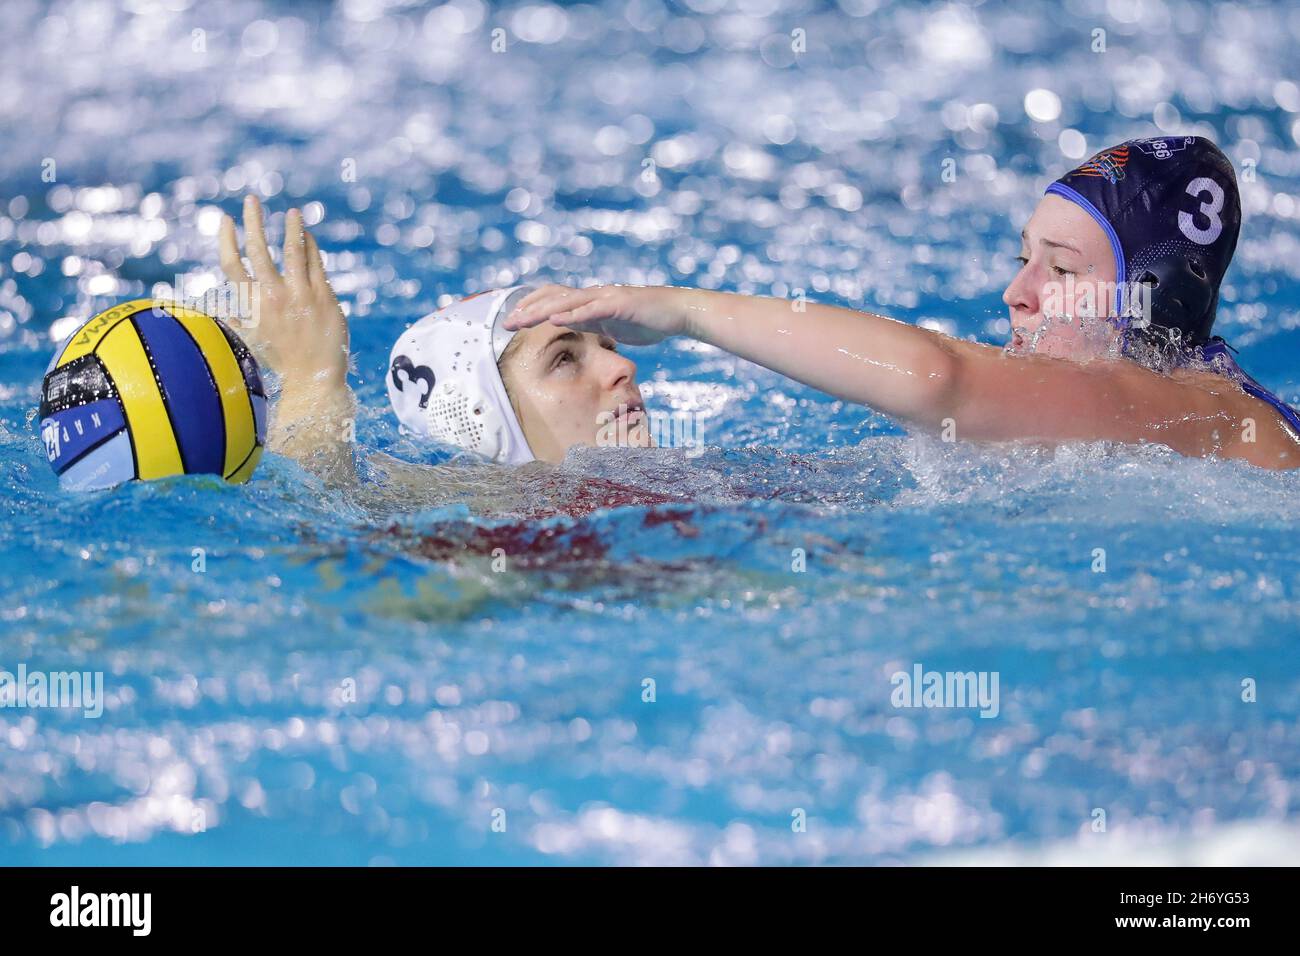 Rome, Italy. 18th Nov, 2021. contrast G. Galardi (SIS Roma) (L) vs L. Roels (ZVL 1886 Center) (R) during SIS Roma vs ZVL 1886 Center, Waterpolo EuroLeague Women match in Rome, Italy, November 18 2021 Credit: Independent Photo Agency/Alamy Live News Stock Photo